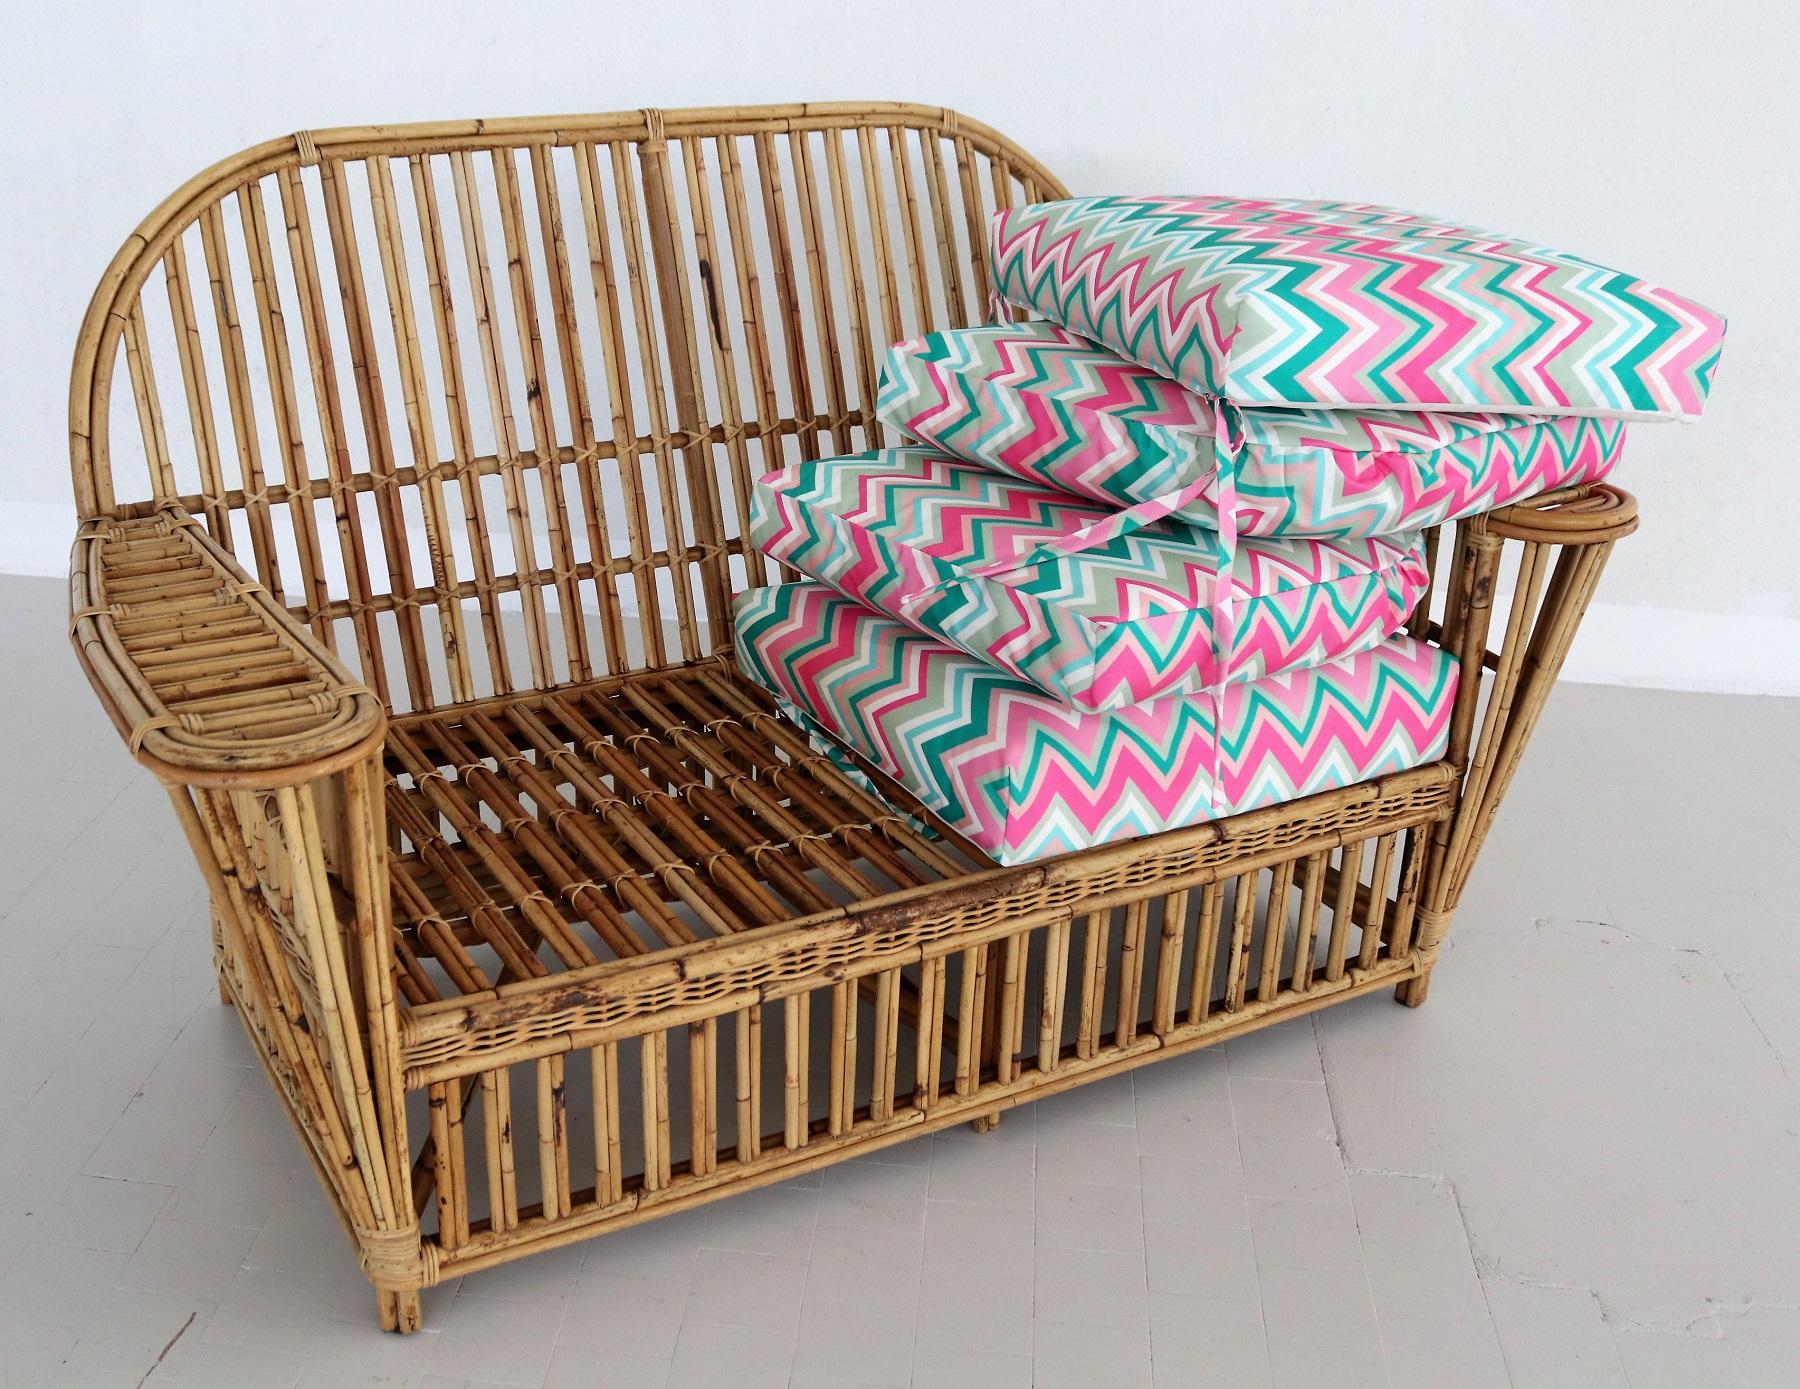 Italian Mid-Century Bamboo and Rattan Sofa with new Upholstery, 1970s For Sale 5